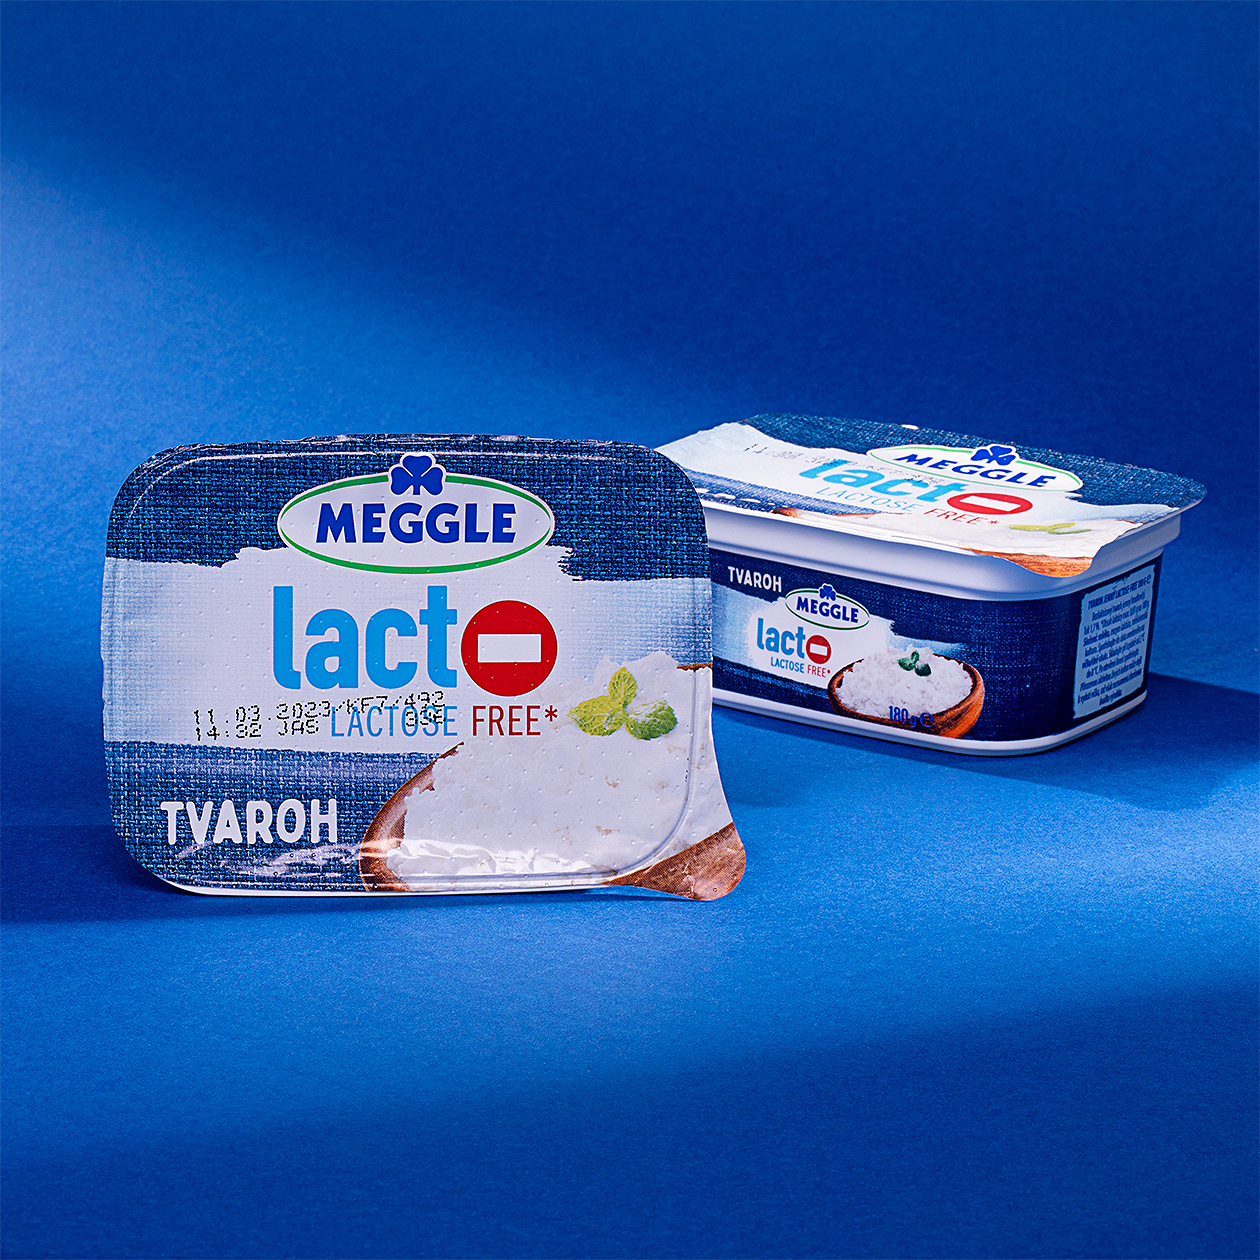 meggle lactose free packaging